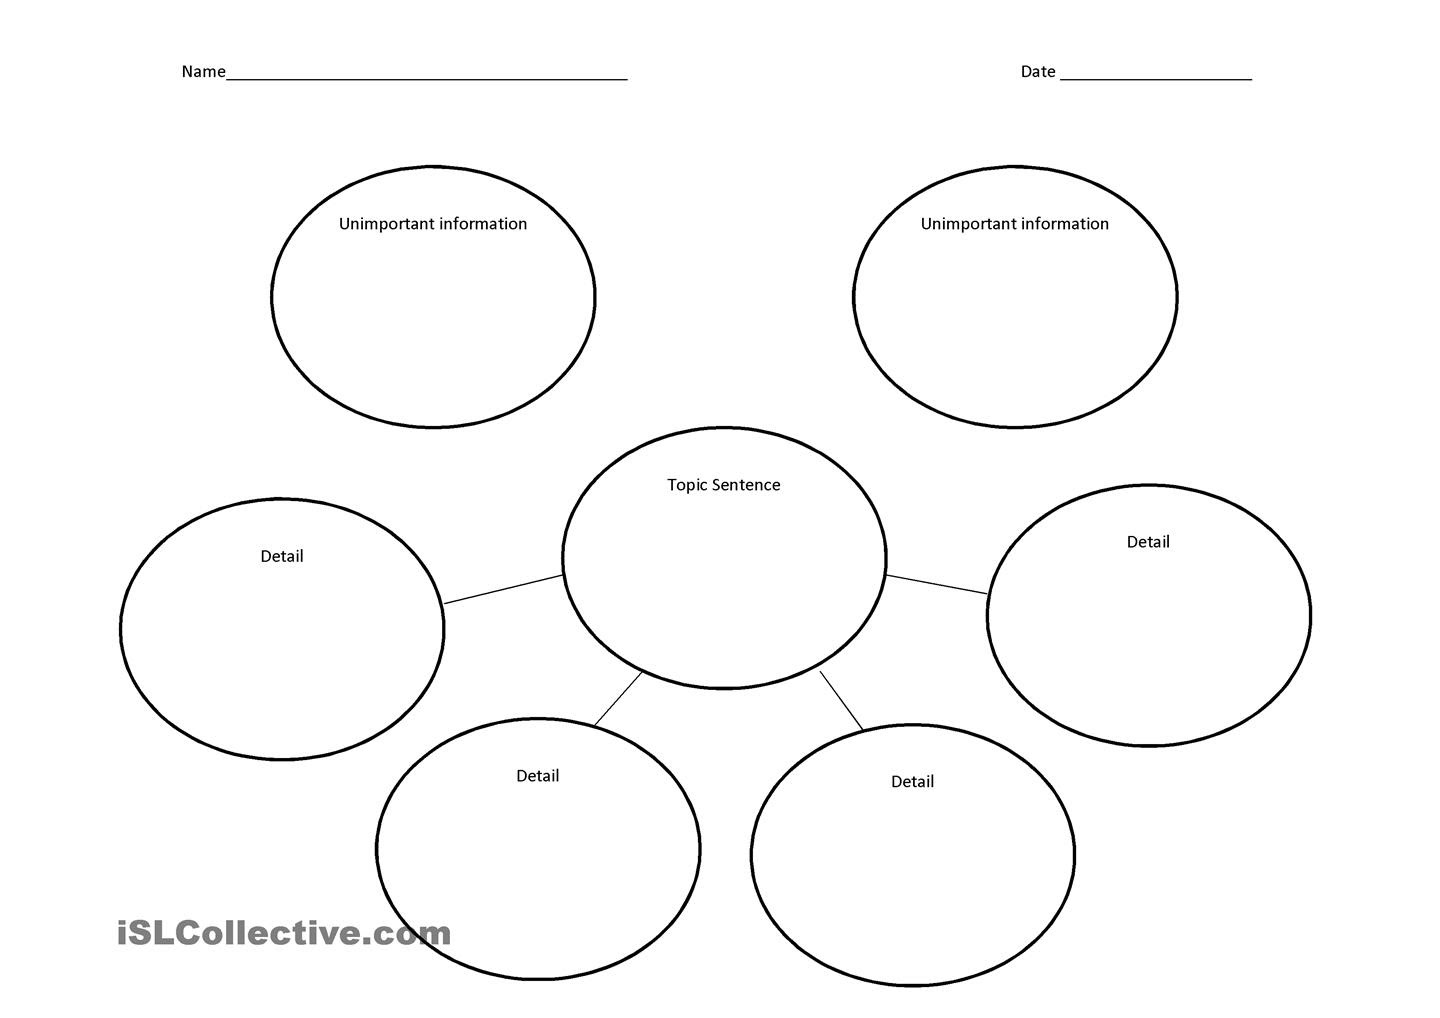 double-bubble-thinking-map-template-new-concept